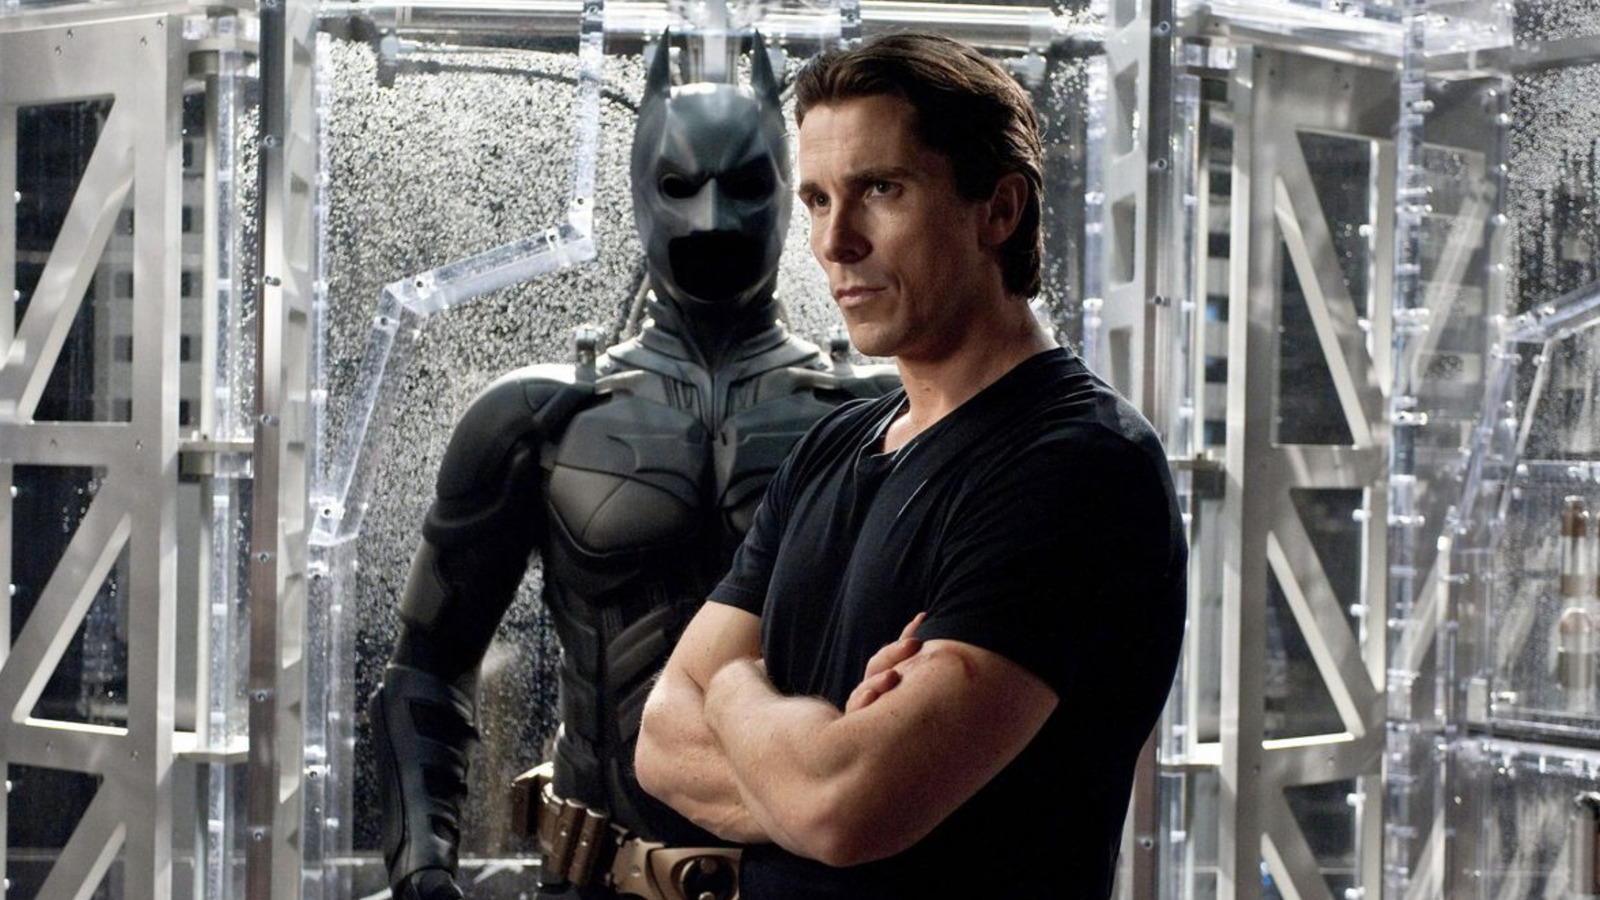 Christopher Nolan Approached The Dark Knight Rises As If It Were A Silent Film